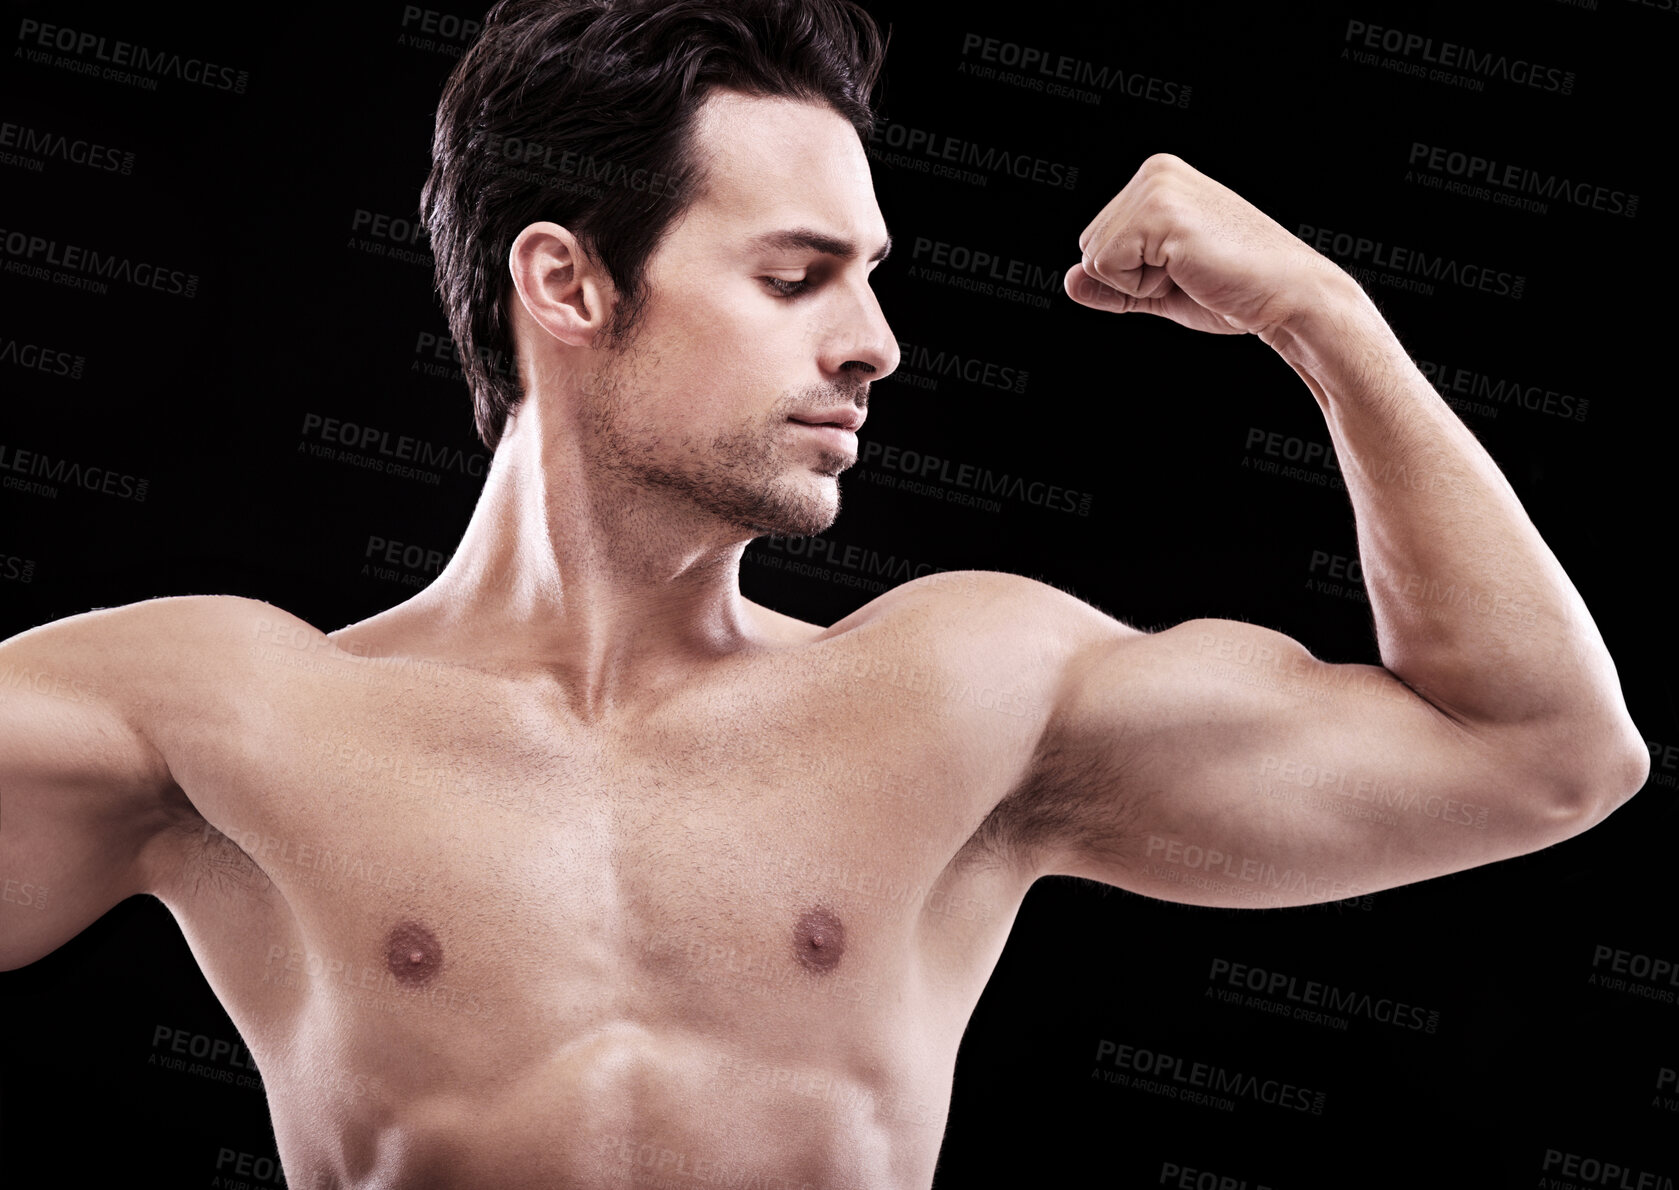 Buy stock photo Studio shot of a handsome bare-chested man flexing a bicep